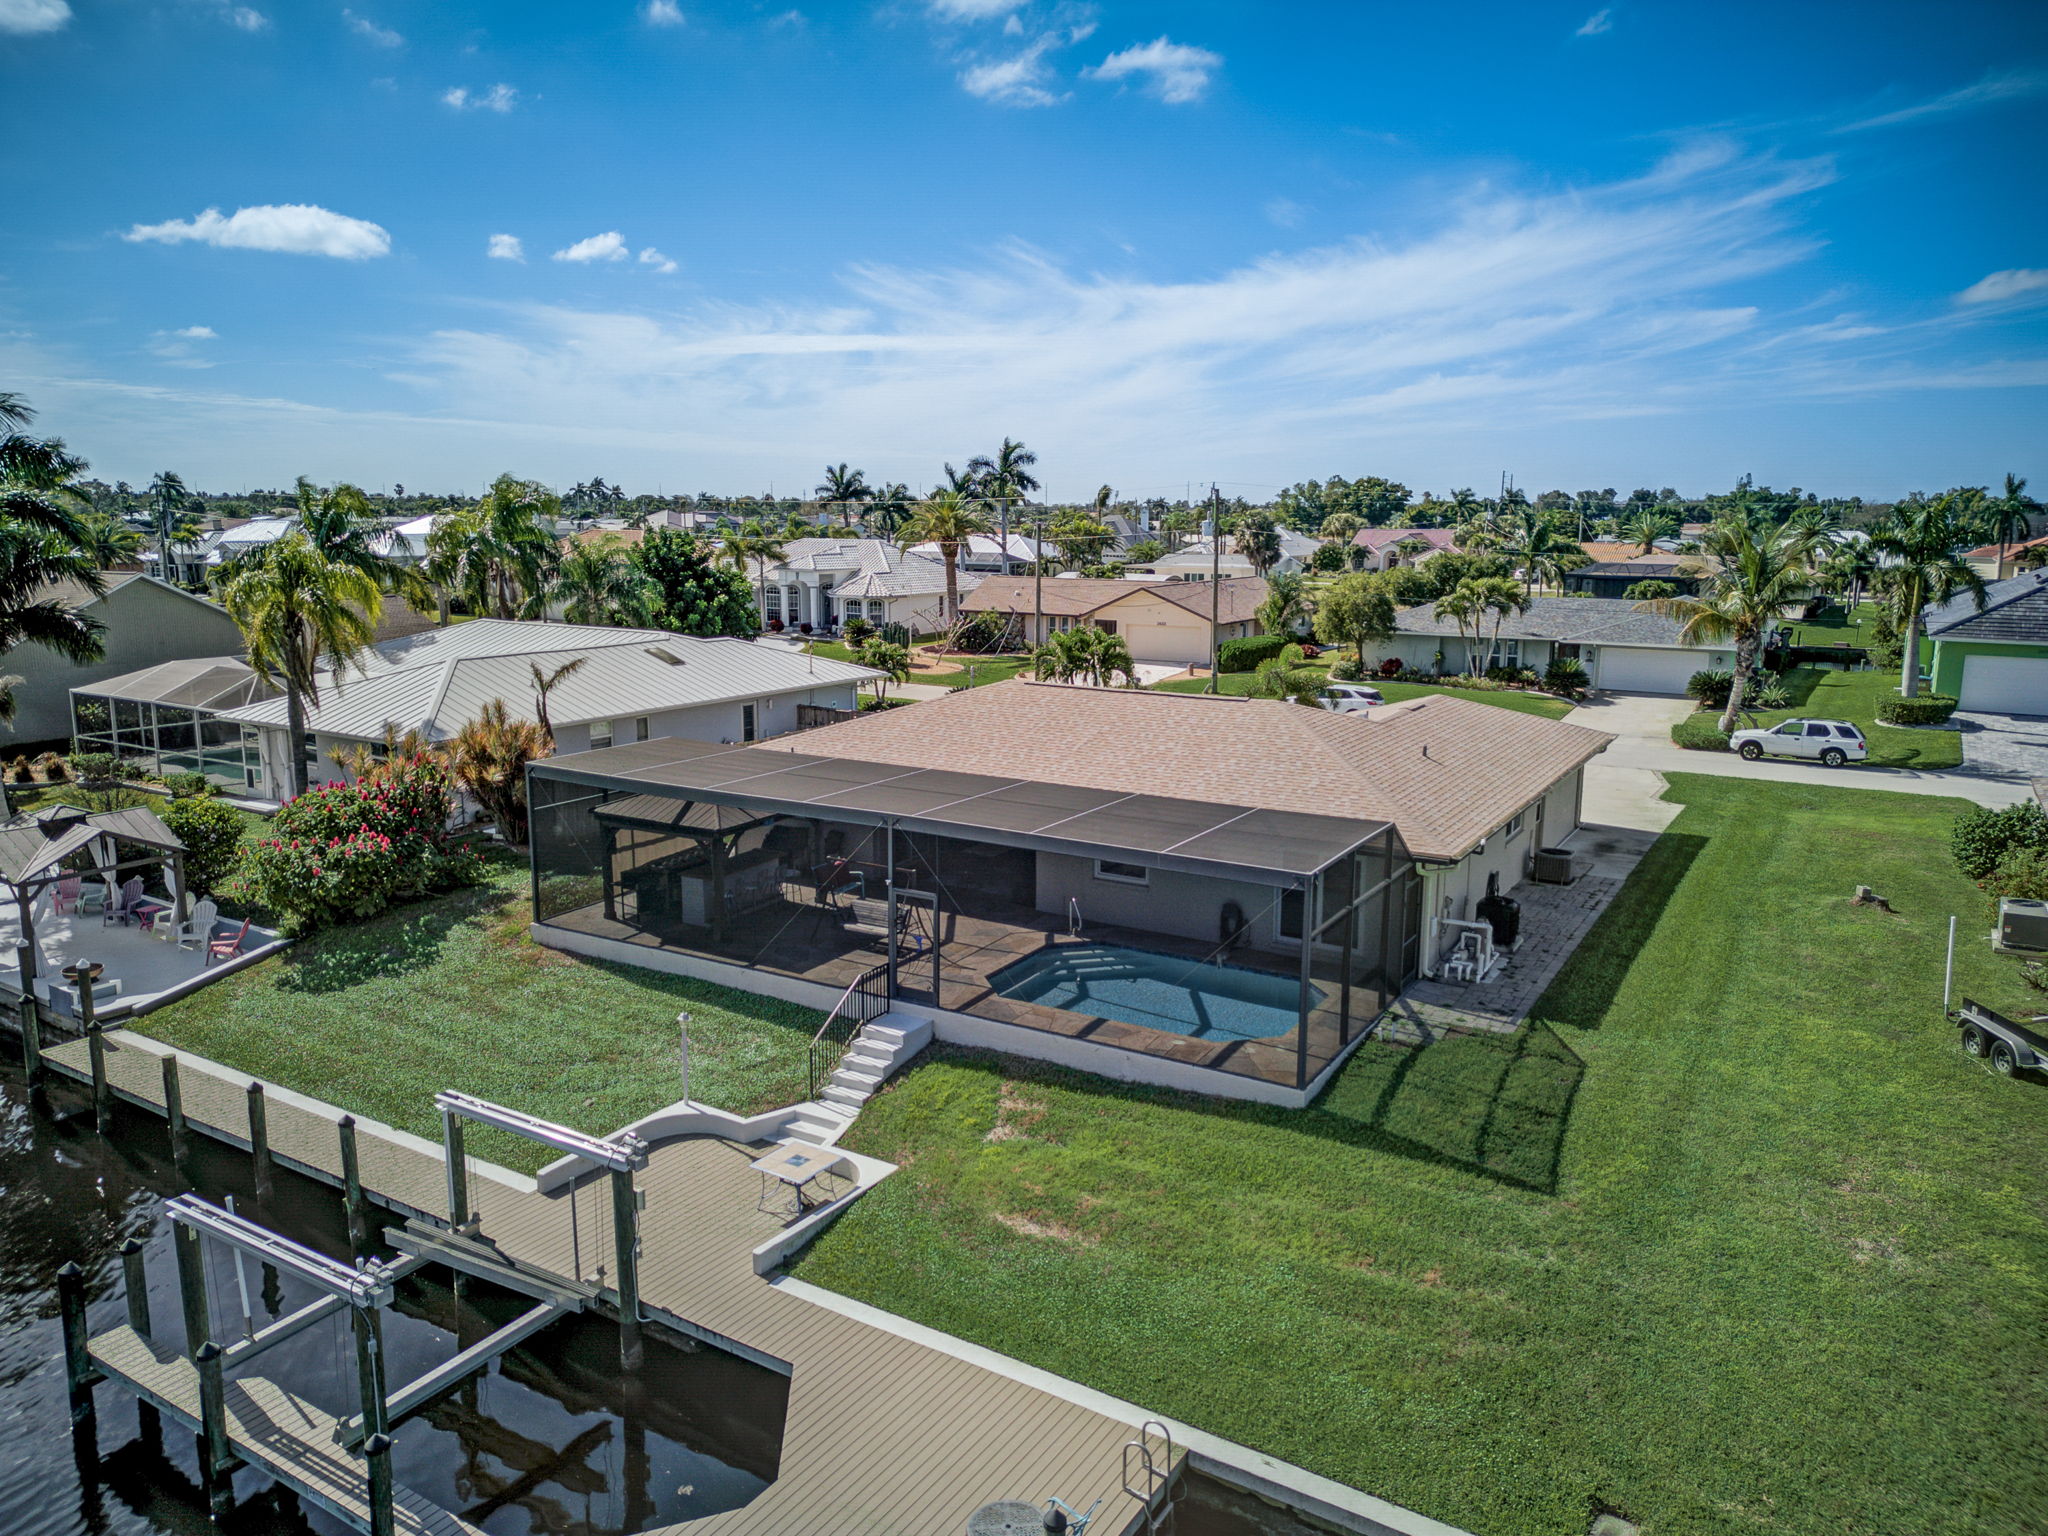 Welcome to this stunning home in beautiful Cape Coral, FL